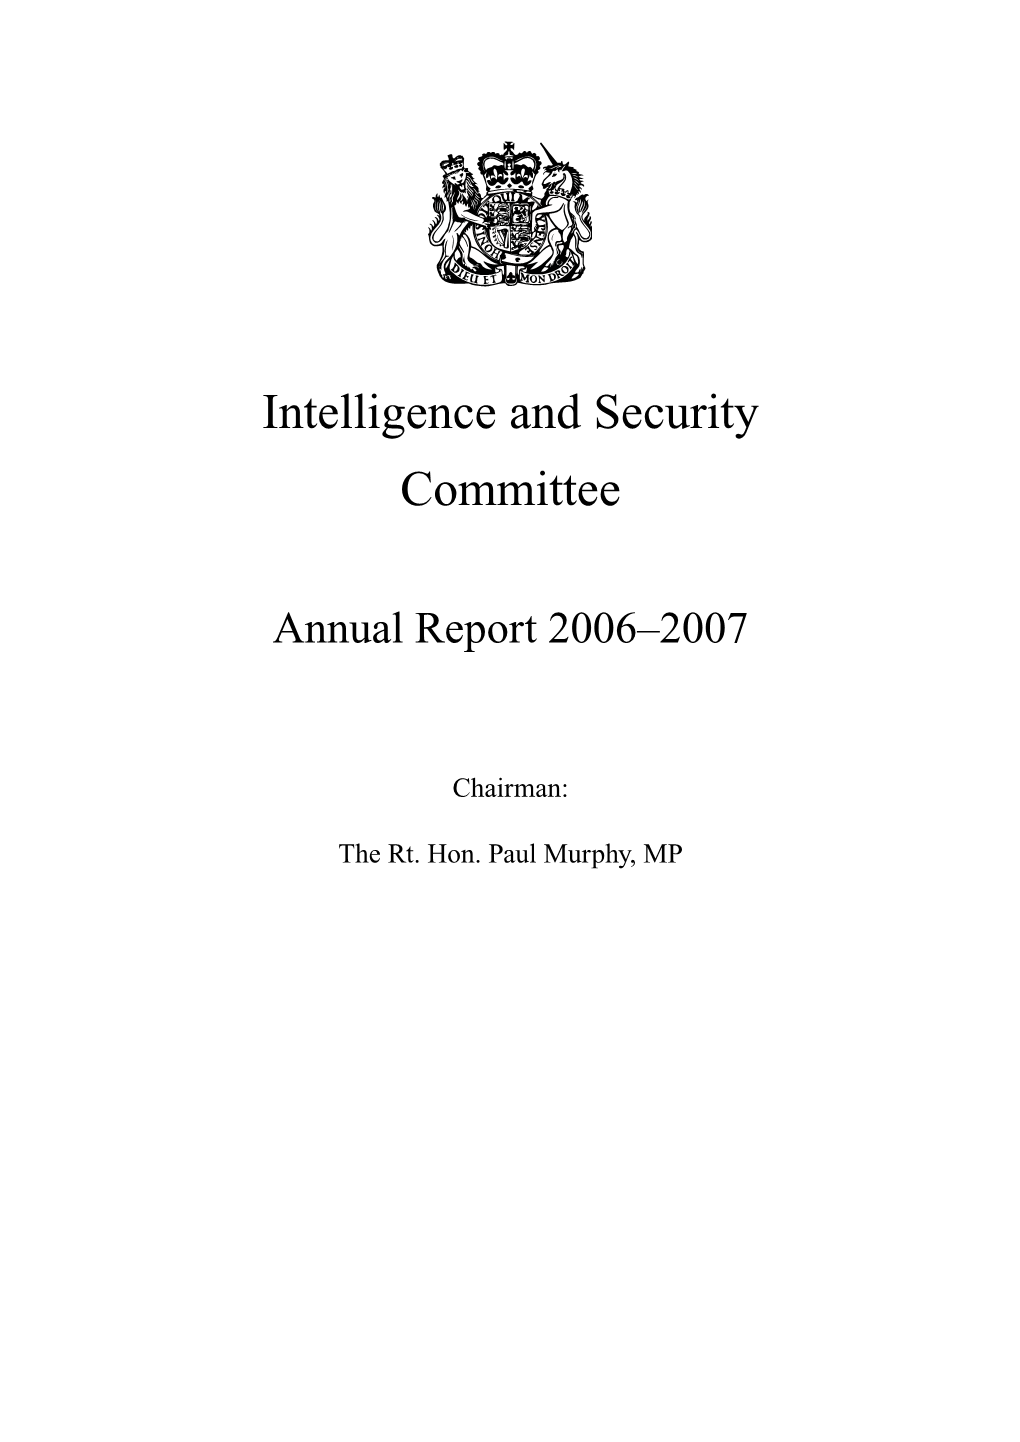 Intelligence and Security Committee